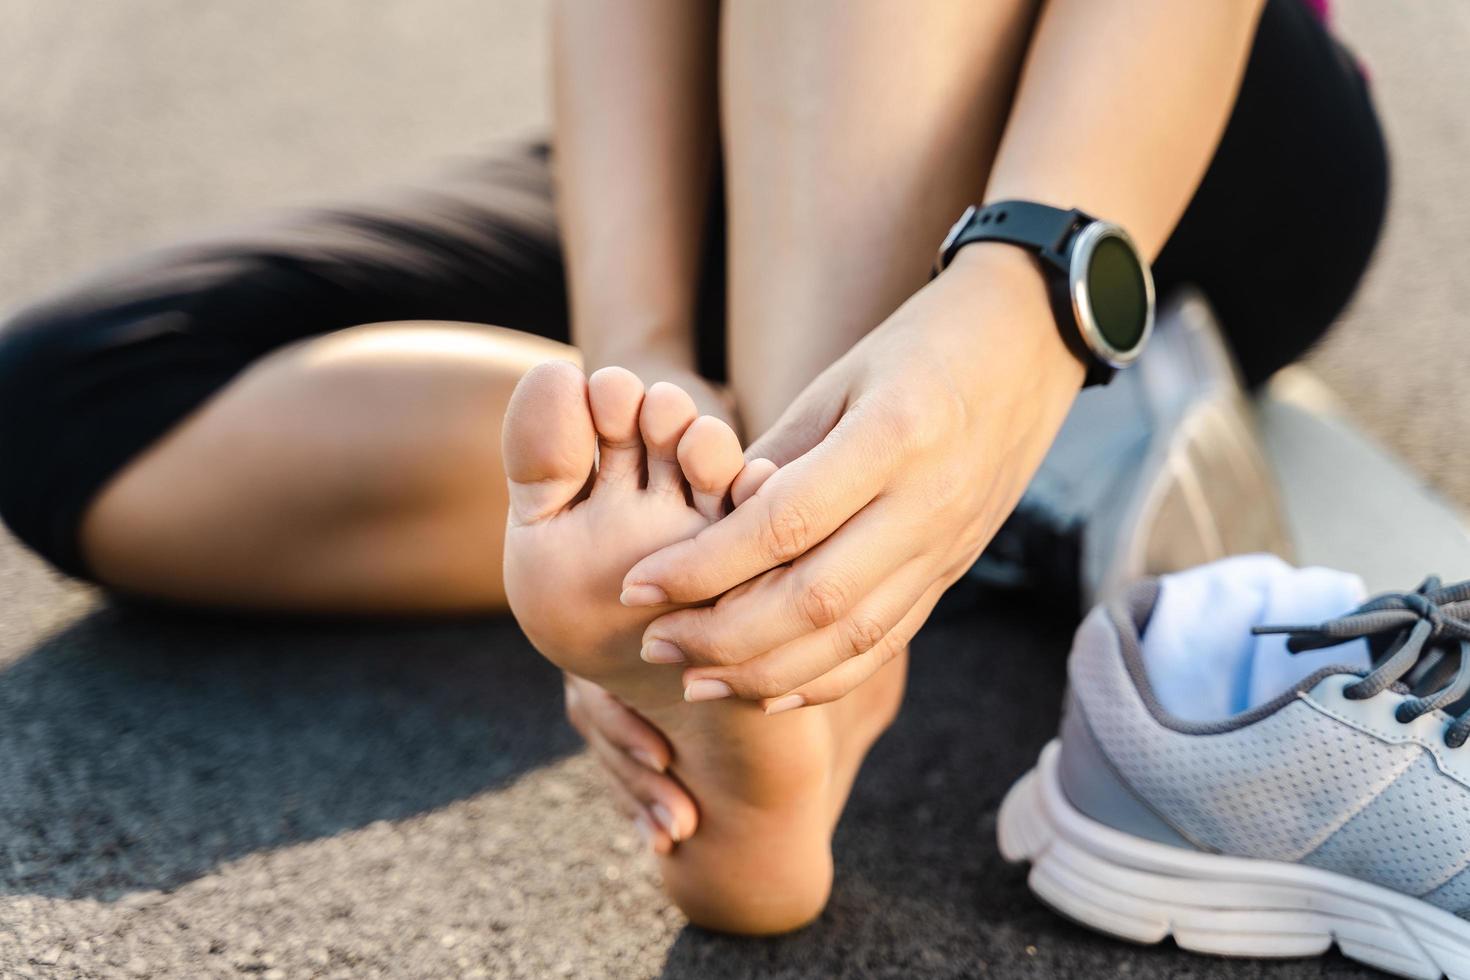 Running injury leg accident- sport woman runner hurting holding painful sprained ankle in pain. Female athlete with joint or muscle soreness and problem feeling ache in her lower body. photo